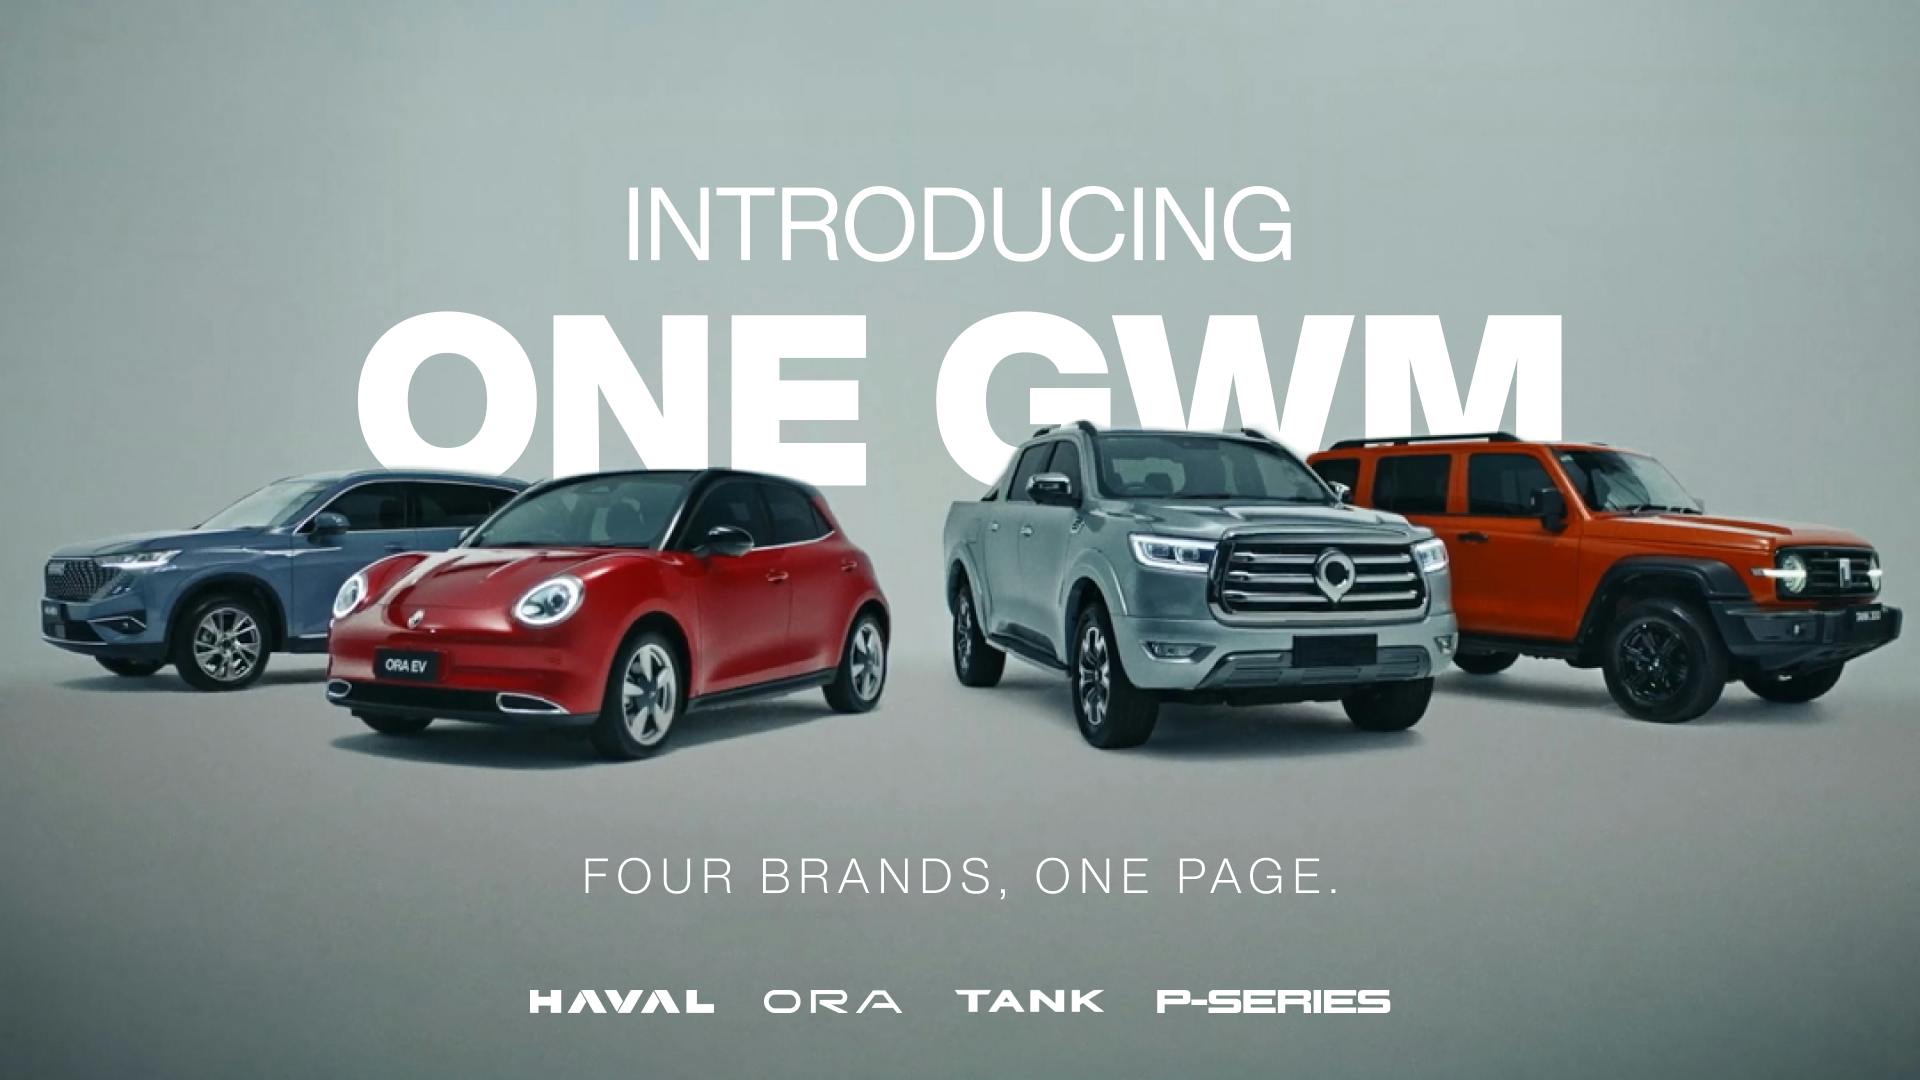 HAVAL, P-SERIES, TANK, and ORA to unite under one ‘GWM South Africa’ social media presence